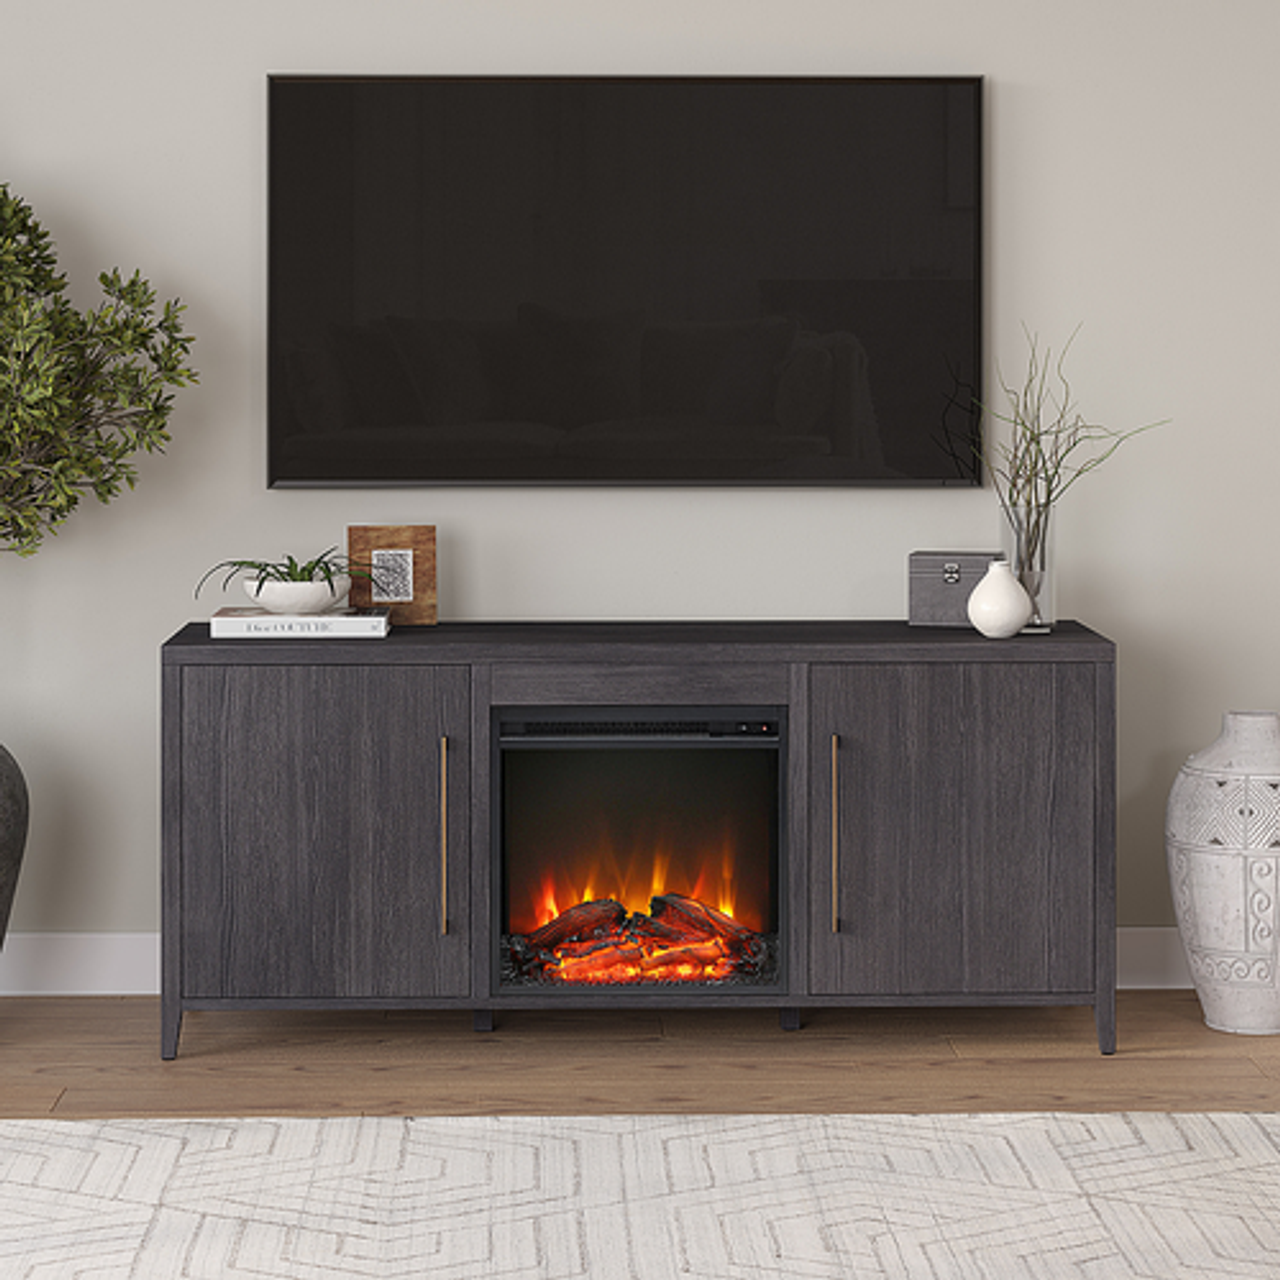 Camden&Wells - Jasper Log Fireplace TV Stand for Most TVs up to 65" - Charcoal Gray